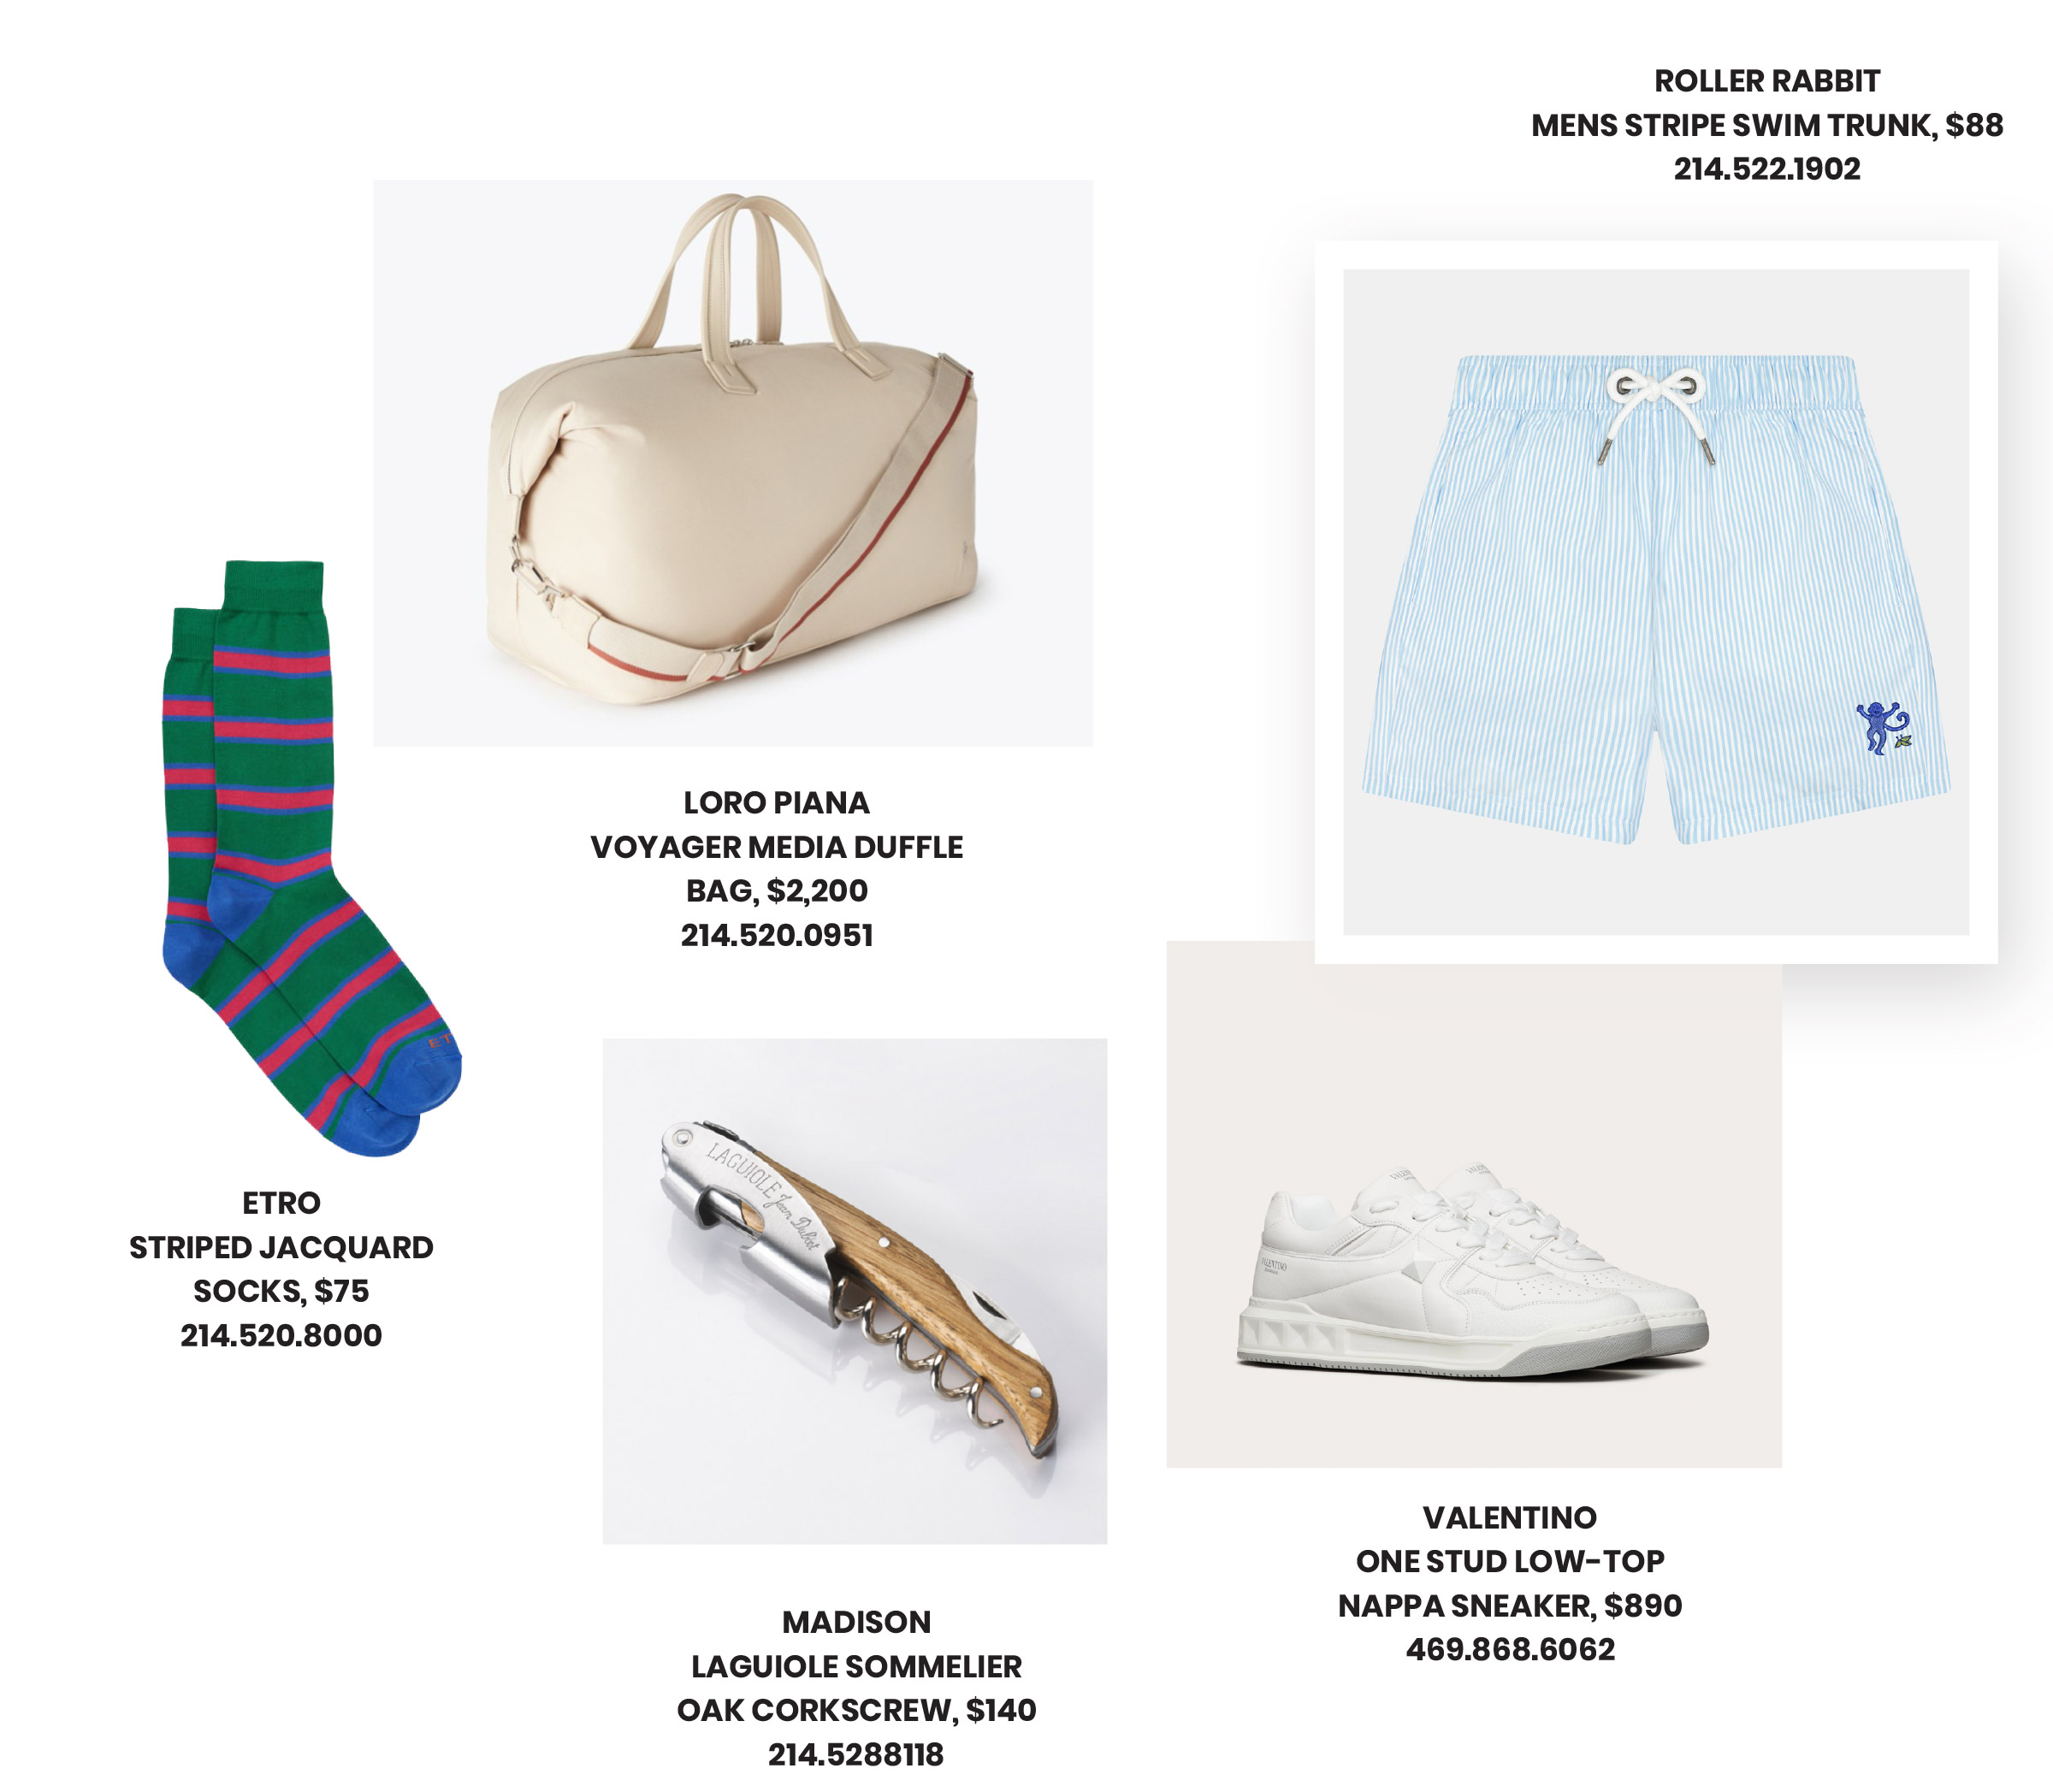 Father’s Day Gifts featuring Loro Piana duffle, Roller Rabbit swim trunks, and Valentino One Stud sneakers